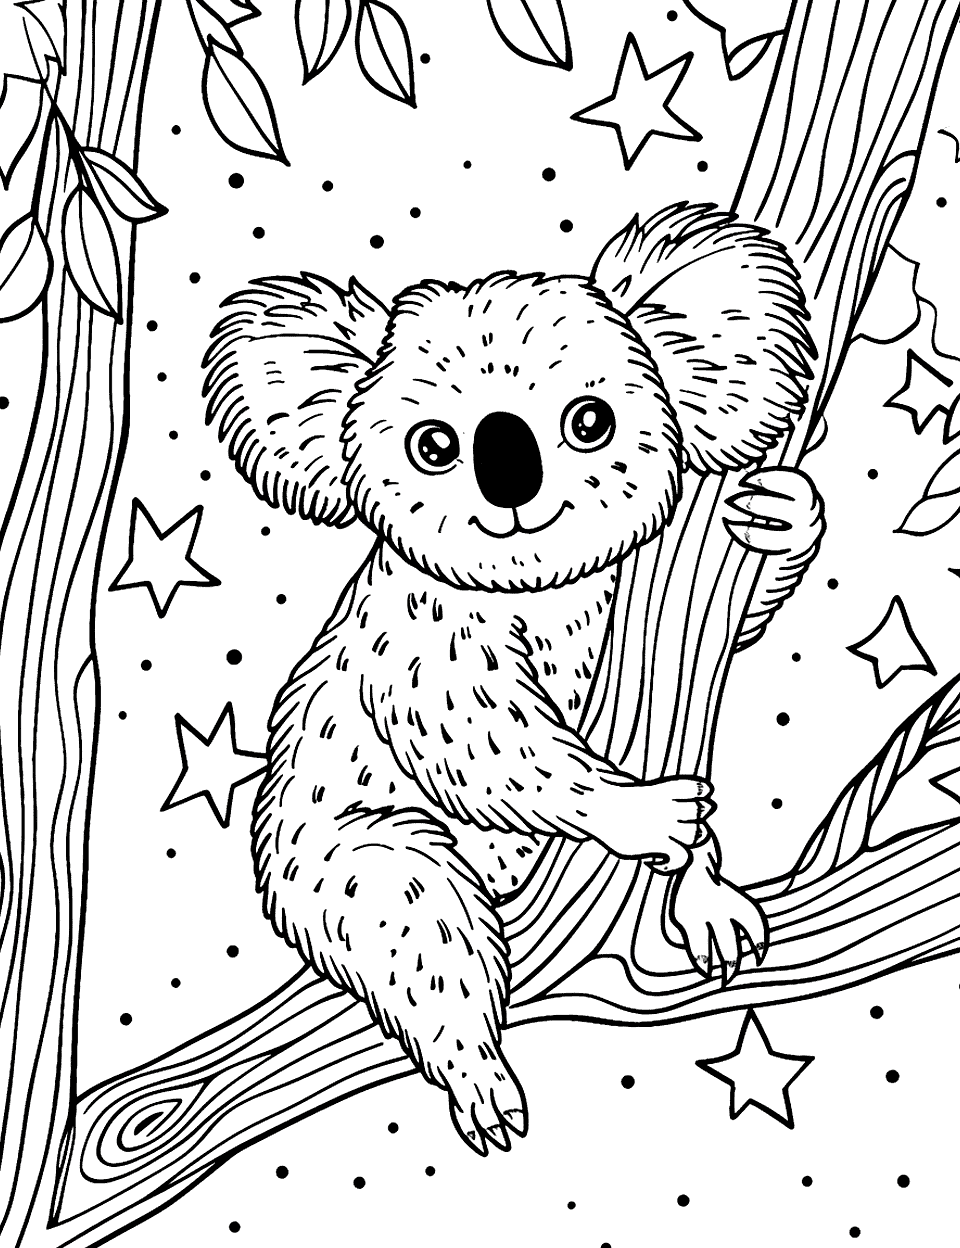 Starry Night with Koala Coloring Page - A koala looking up at a star-filled sky from the safety of its tree.